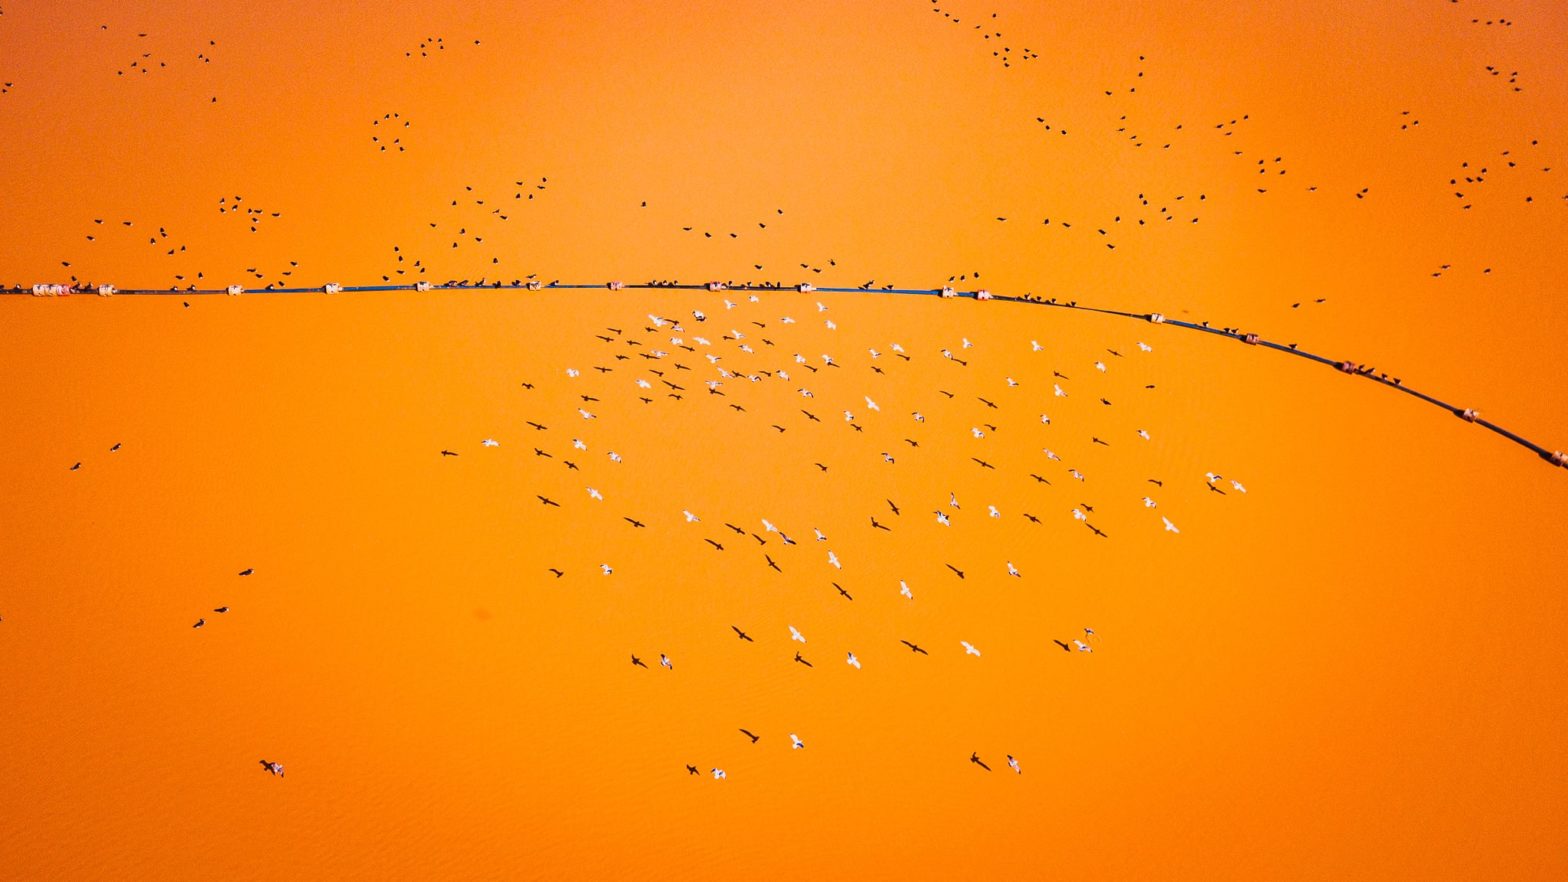 A pipeline floating in polluted orange water together with ducks and seagulls